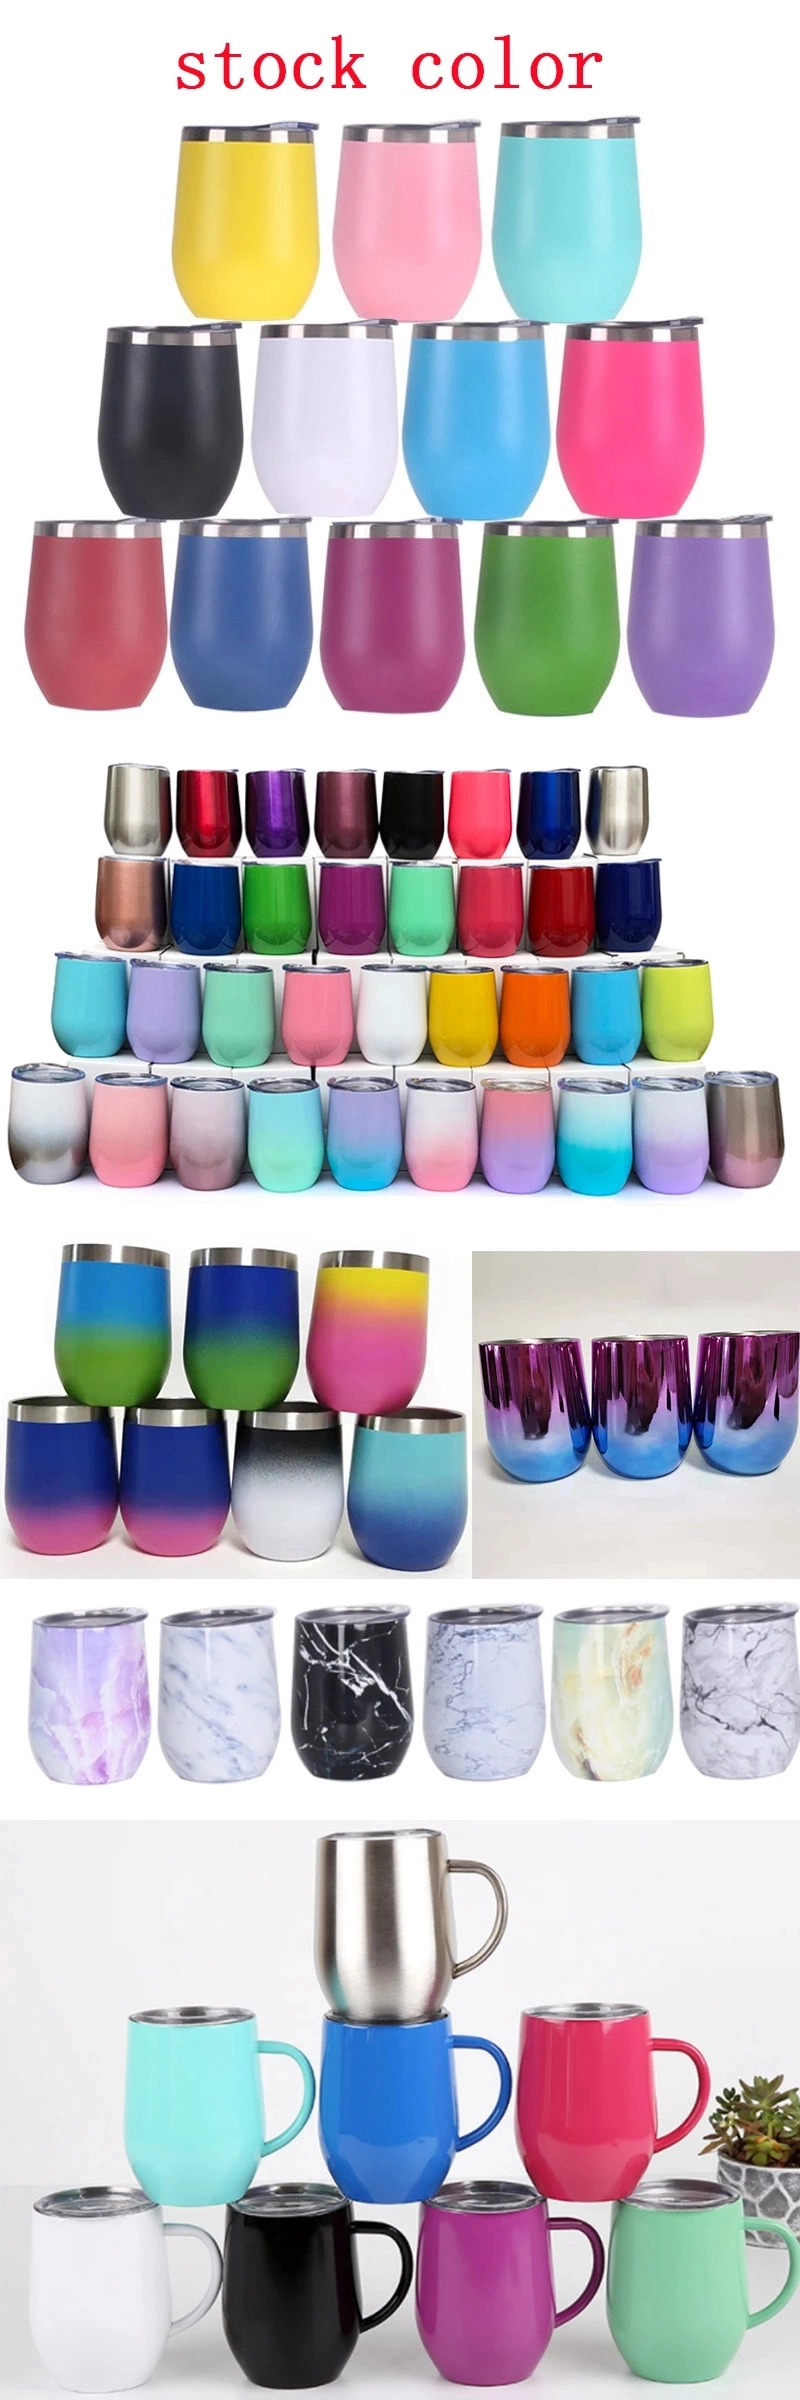 Rainbow Color Swig Egg Shape Stemless Wine Cups Stainless Steel Insulated Drinking Tumbler Mug 12oz Glass